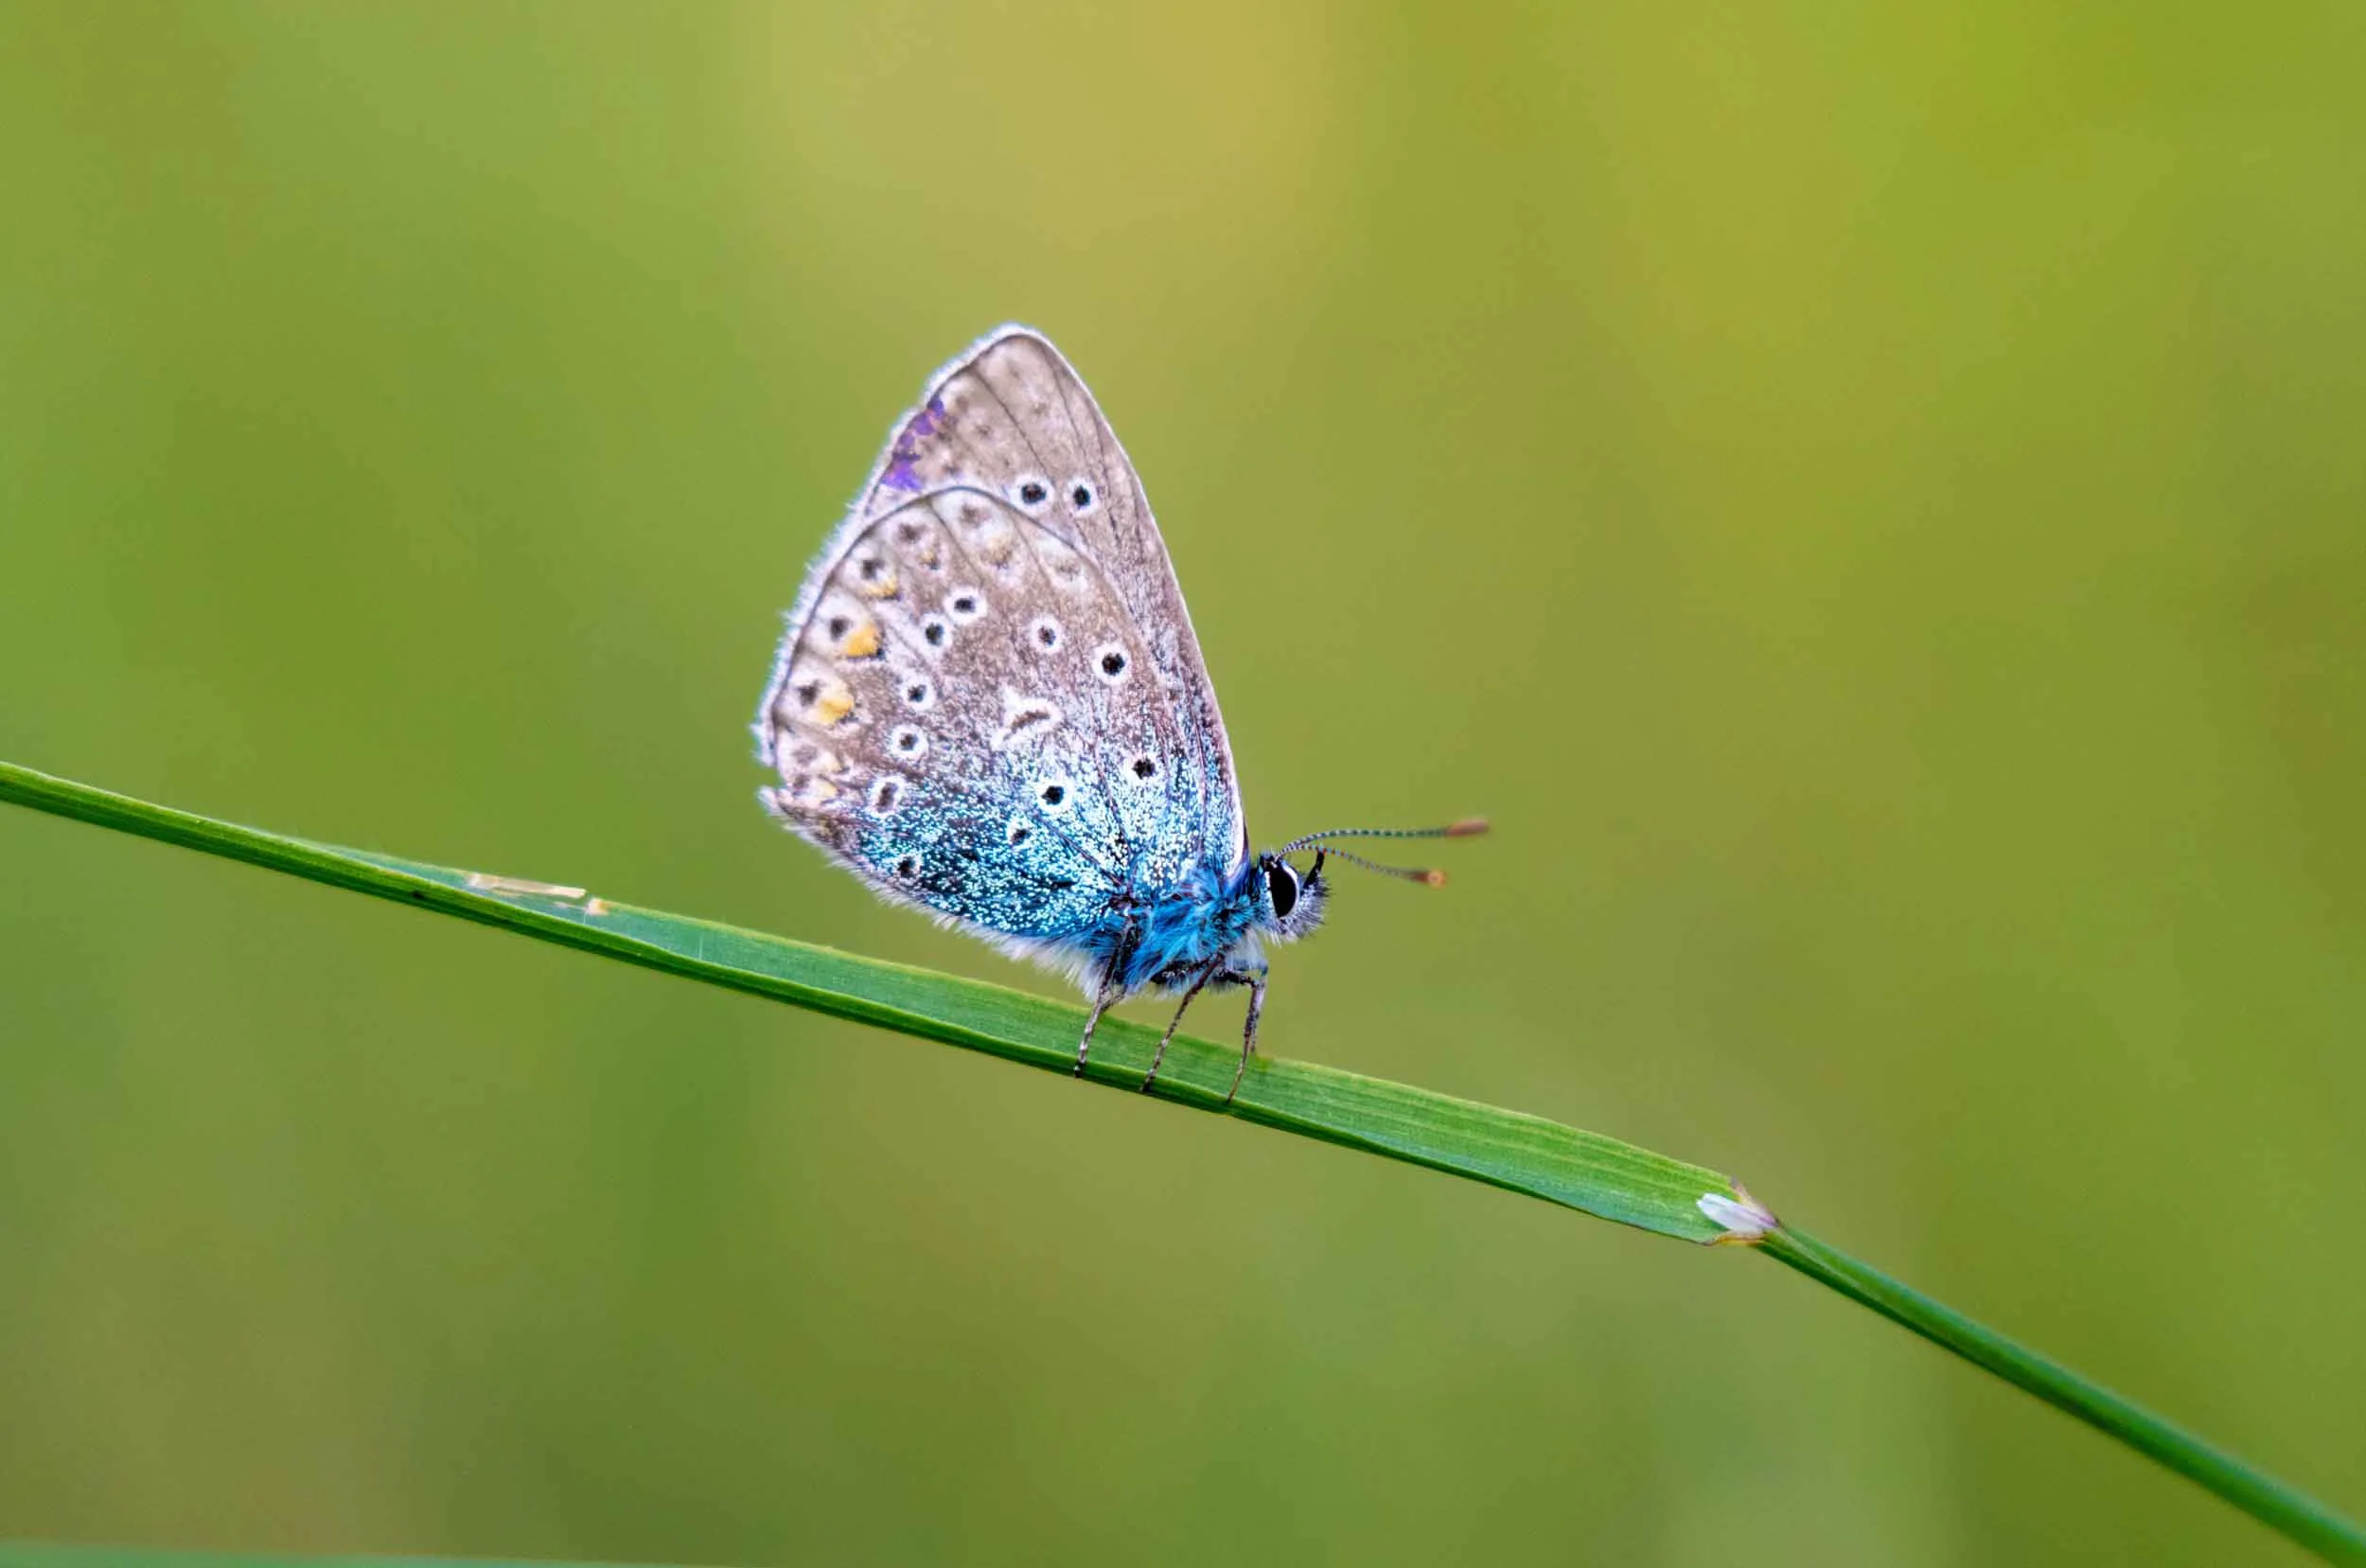 A Large Blue Butterfly perched on a singular strand grass.